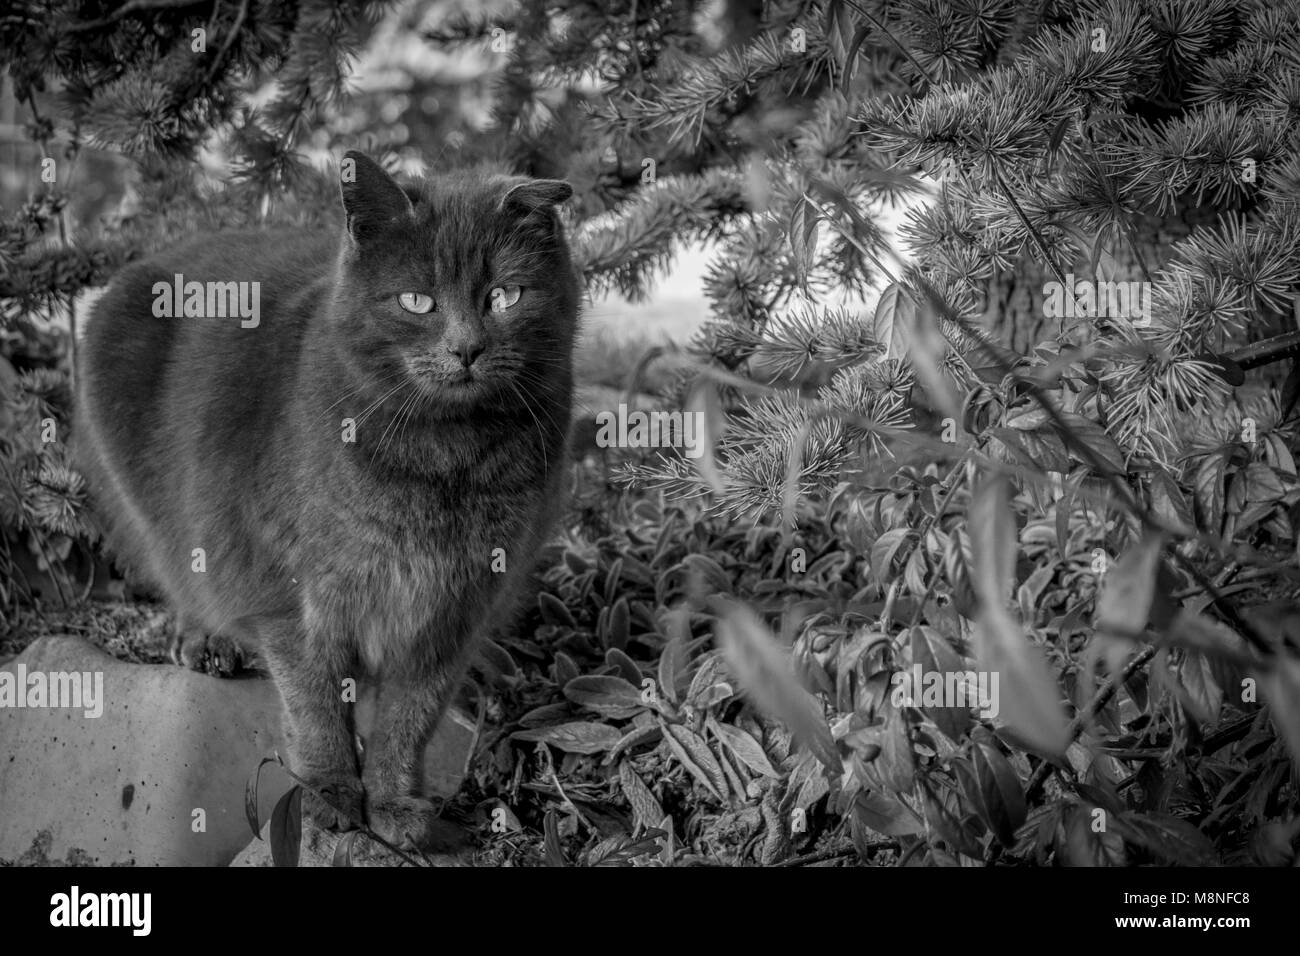 Grey cat in the garden, black and white image. Grey kitten in the garden beside plants and pine tree. Stock Photo